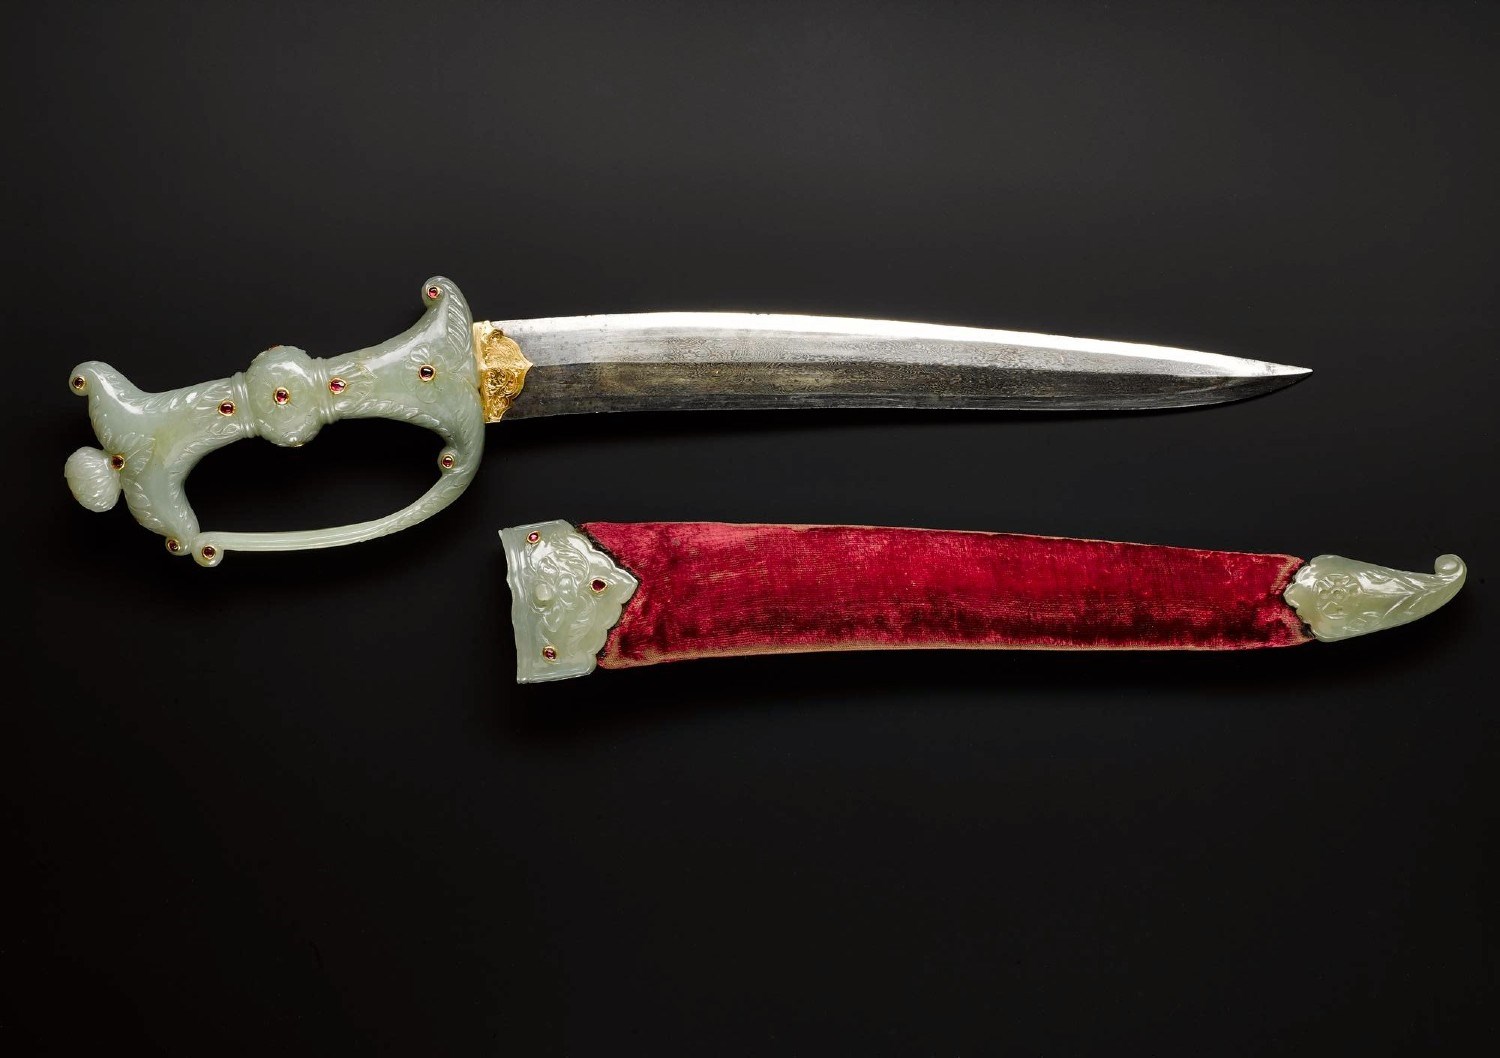 Dagger With Blade Of Damascened Steel India and sheath, C. 1700_Baggage and Belonging_Project Catalogues_landscape_1500x1058